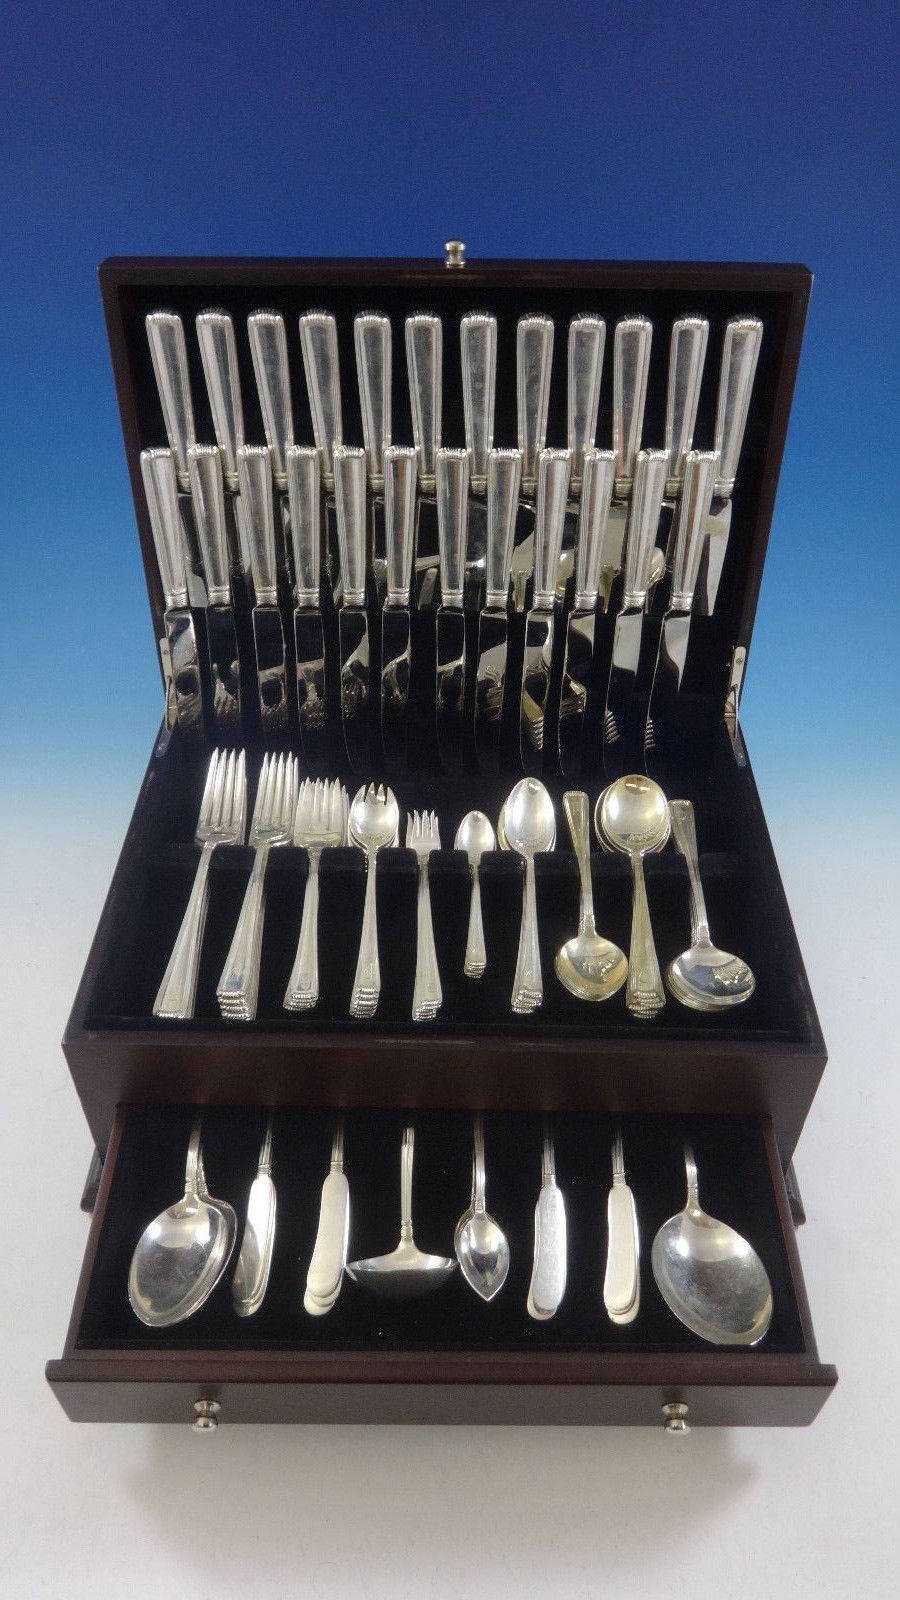 Embassy Scroll by Cartier sterling silver flatware set of 175 pieces. This set includes: 12 dinner size knives, 9 1/2